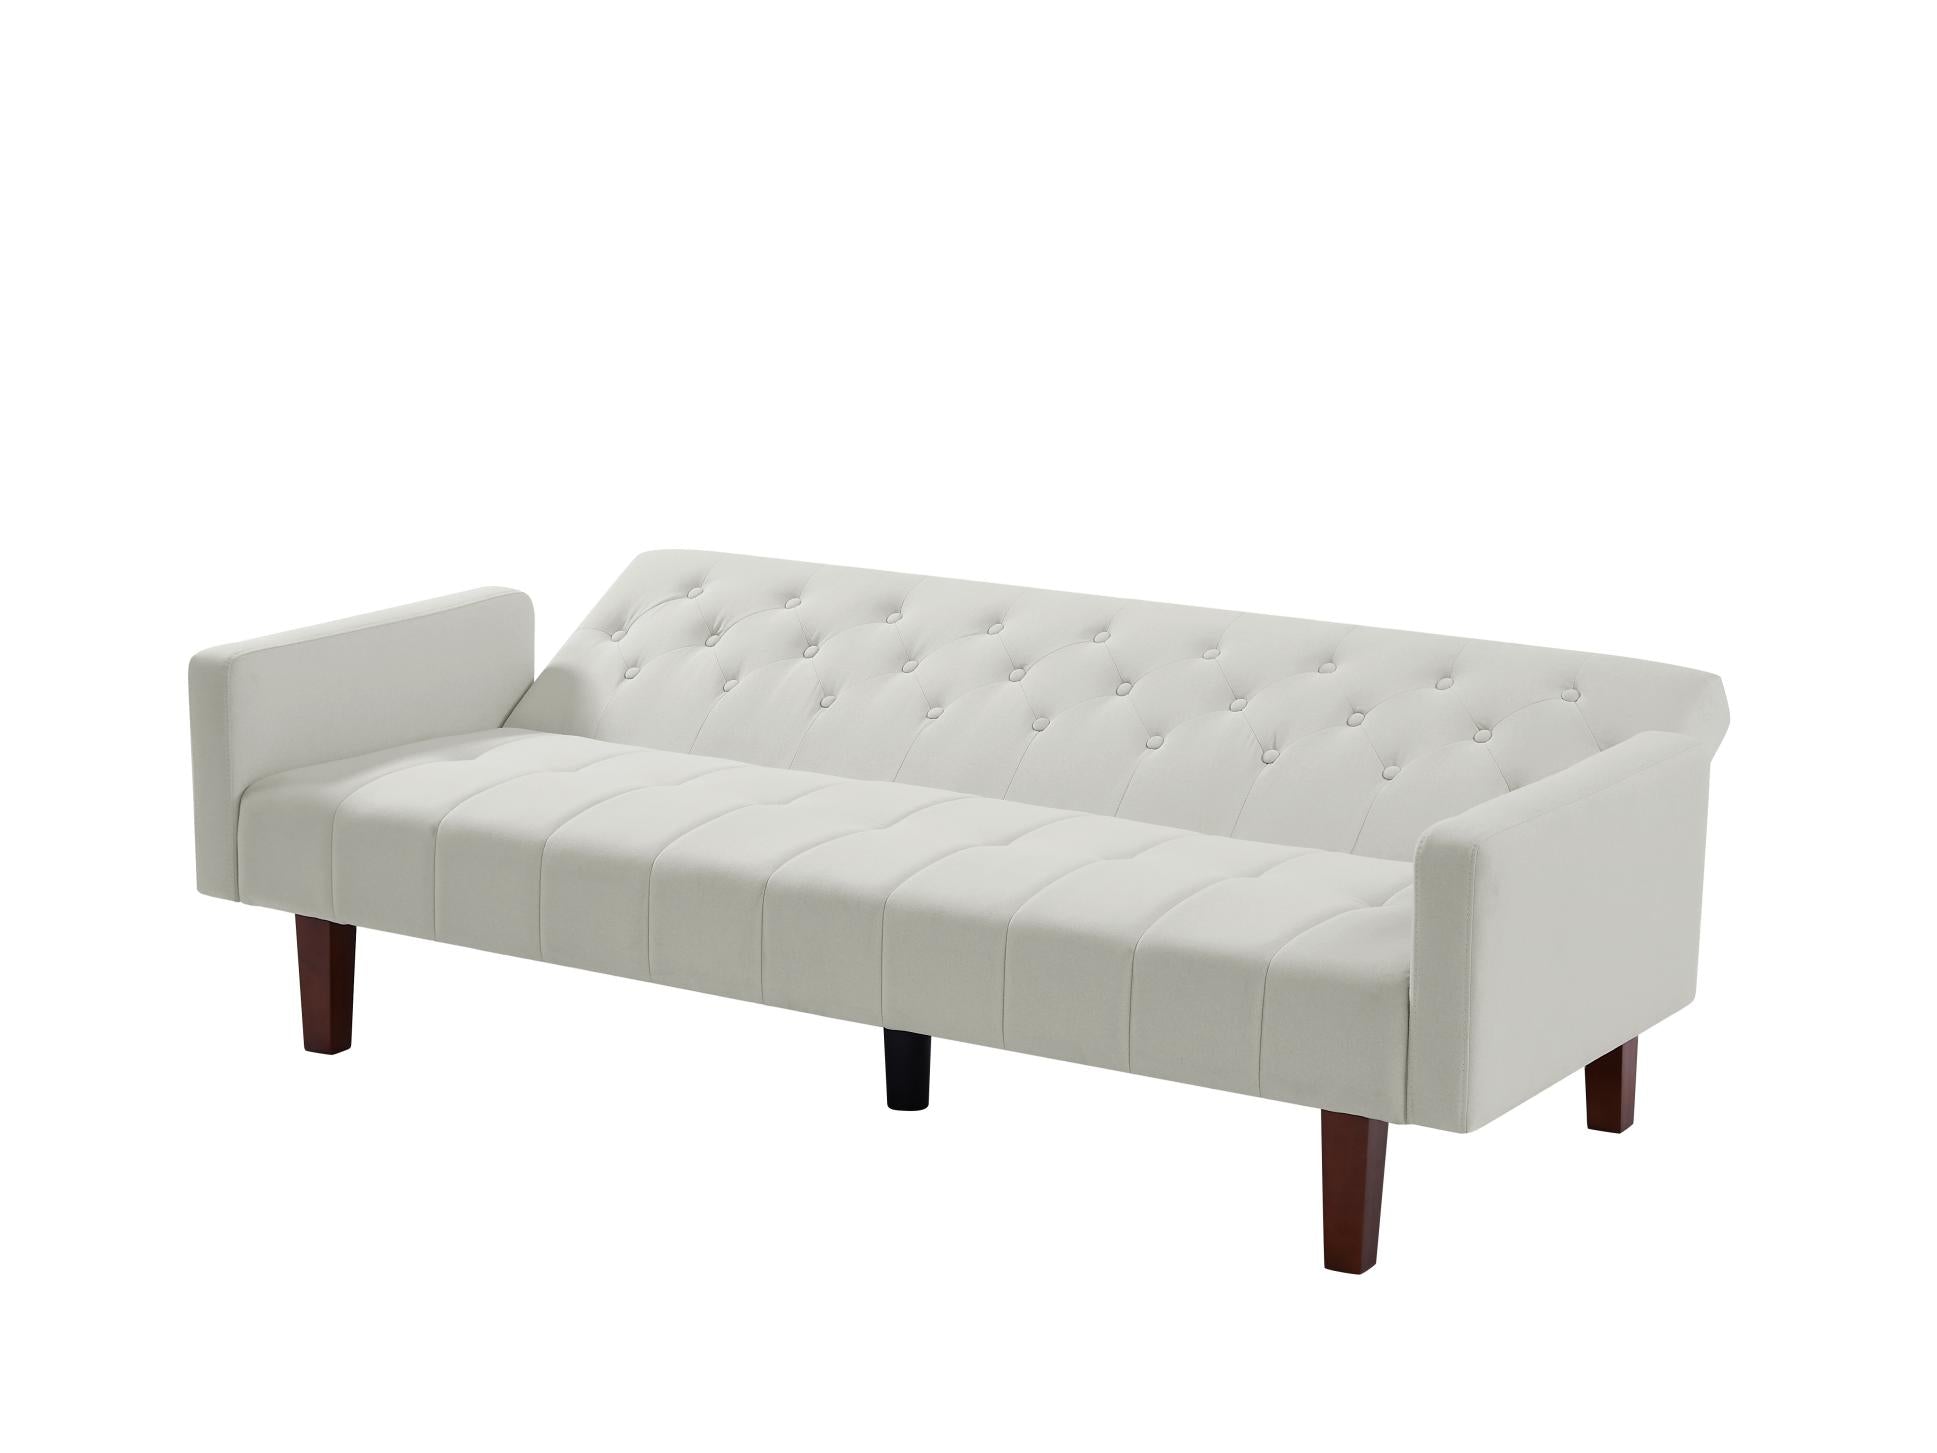 ZNTS Beige, Linen, Convertible Double Folding Living Room Sofa Bed 40751600